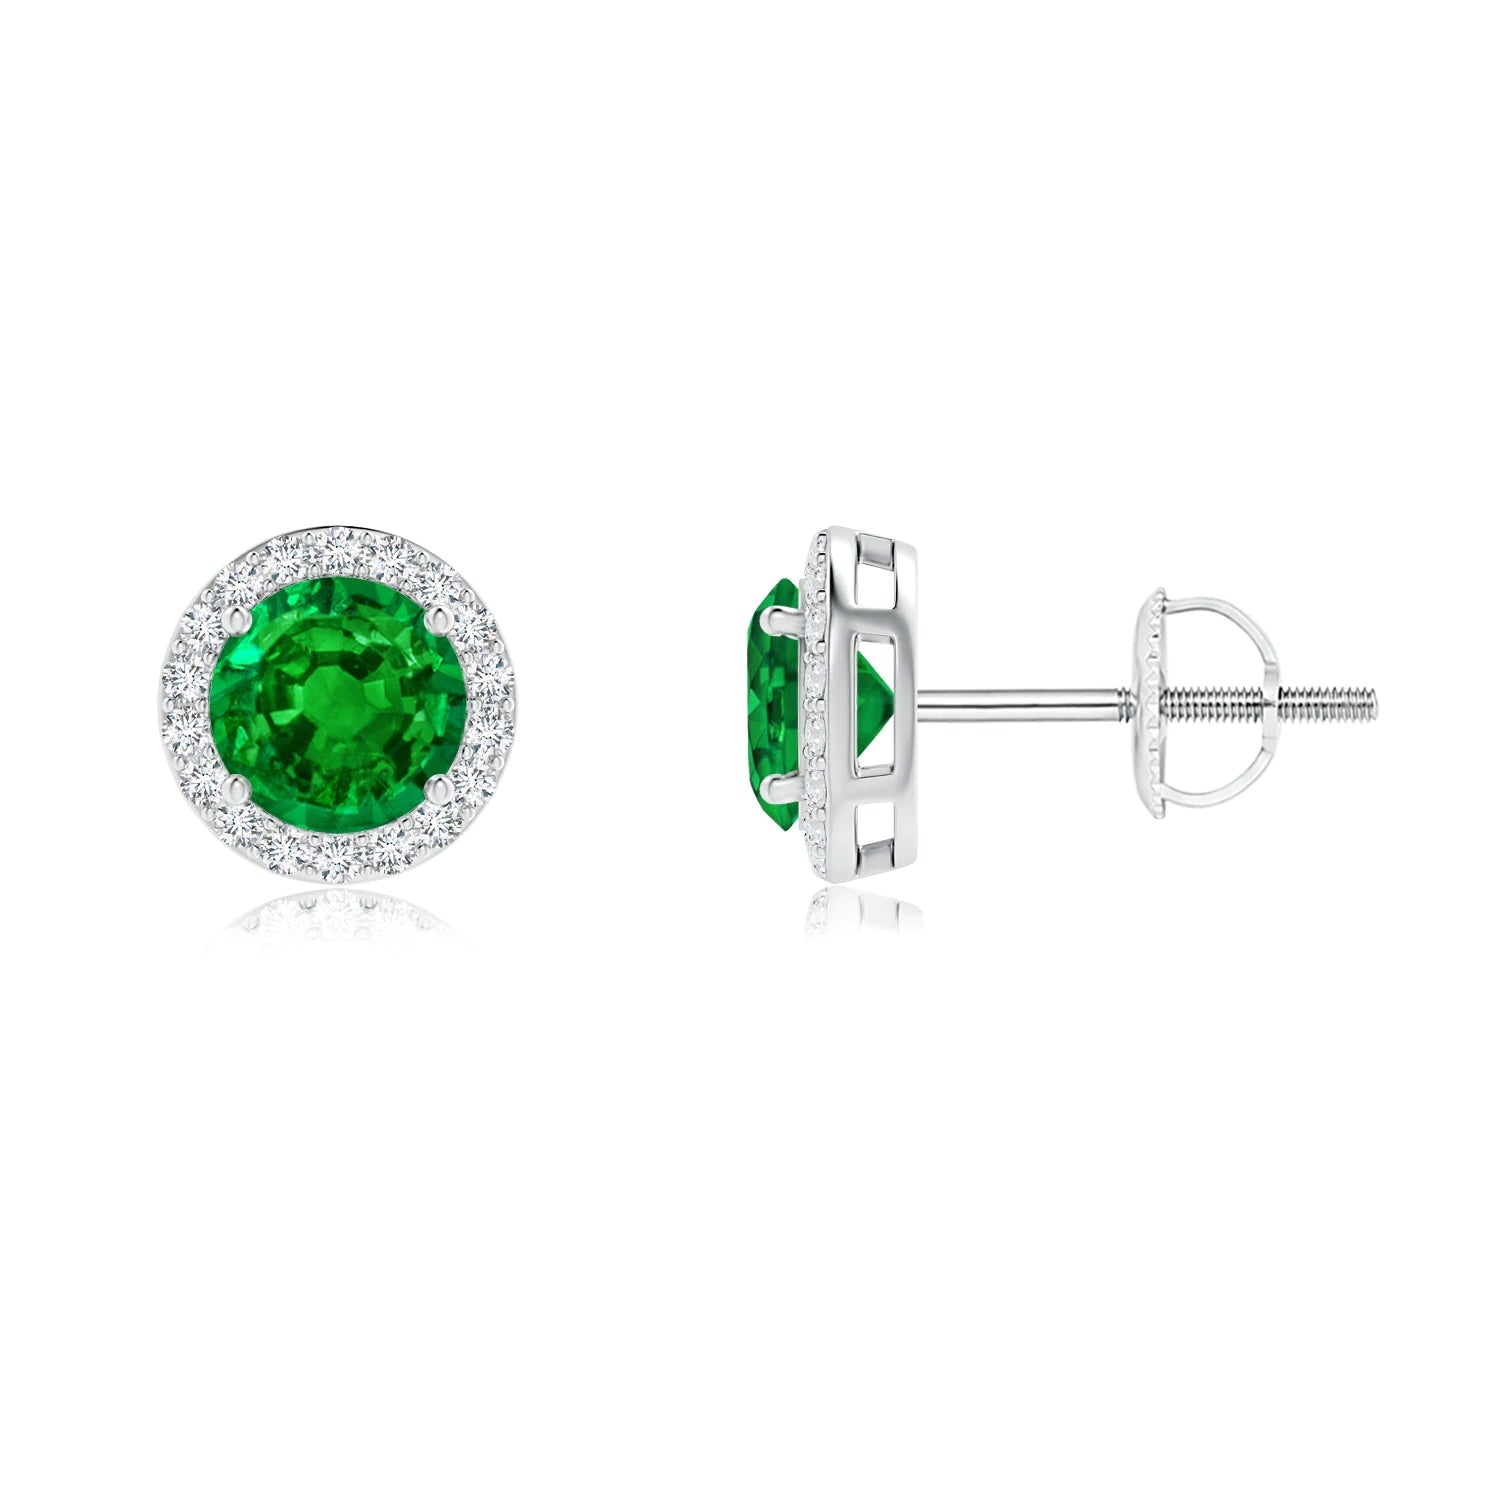 1.18 CT. Emerald and Pavé Halo Stud Earrings